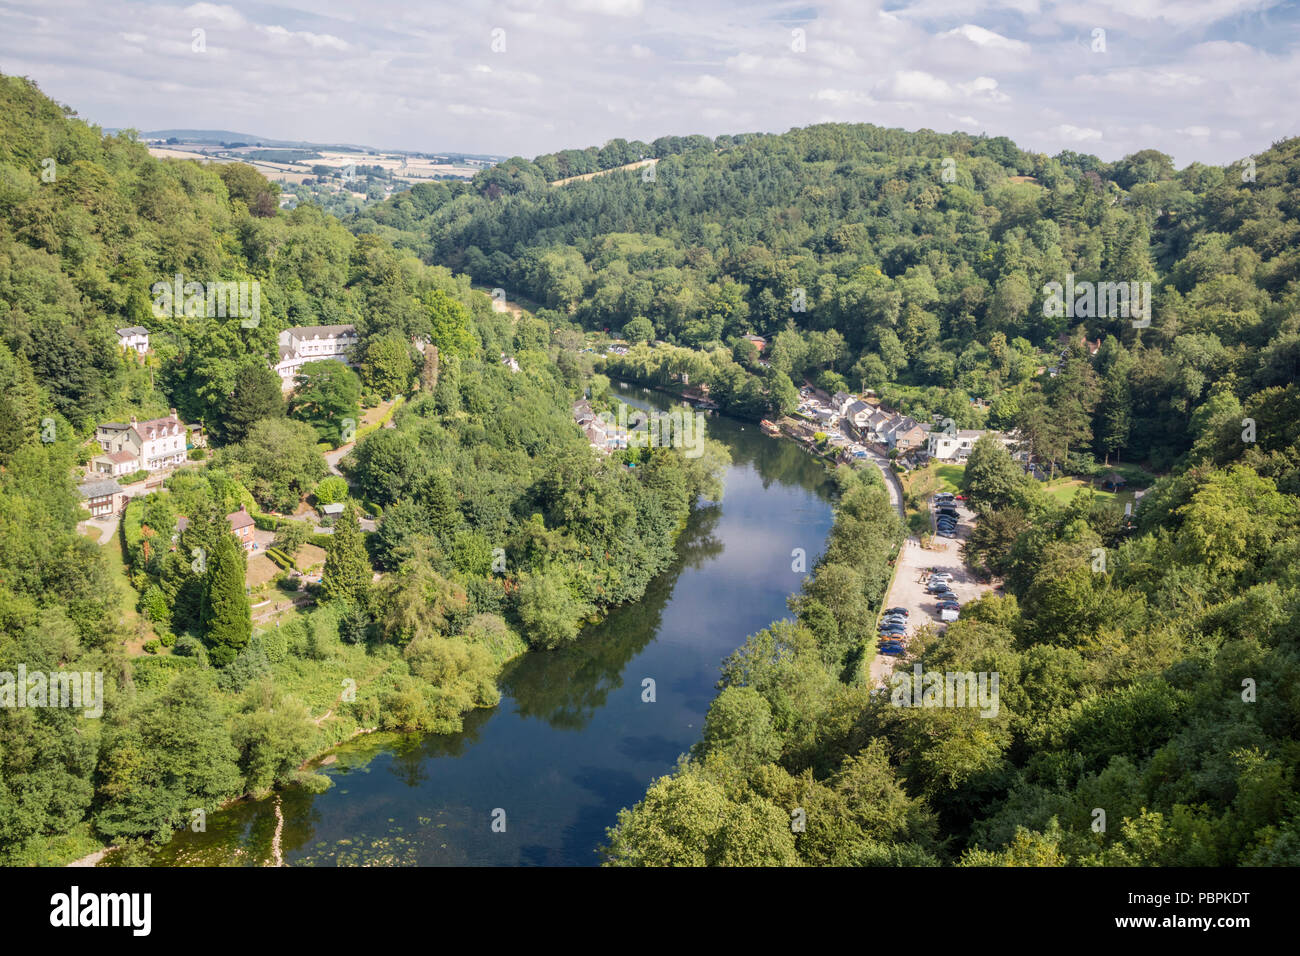 Symonds Yat in the Wye valley looking over the River Wye Herefordshire, England, UK Stock Photo